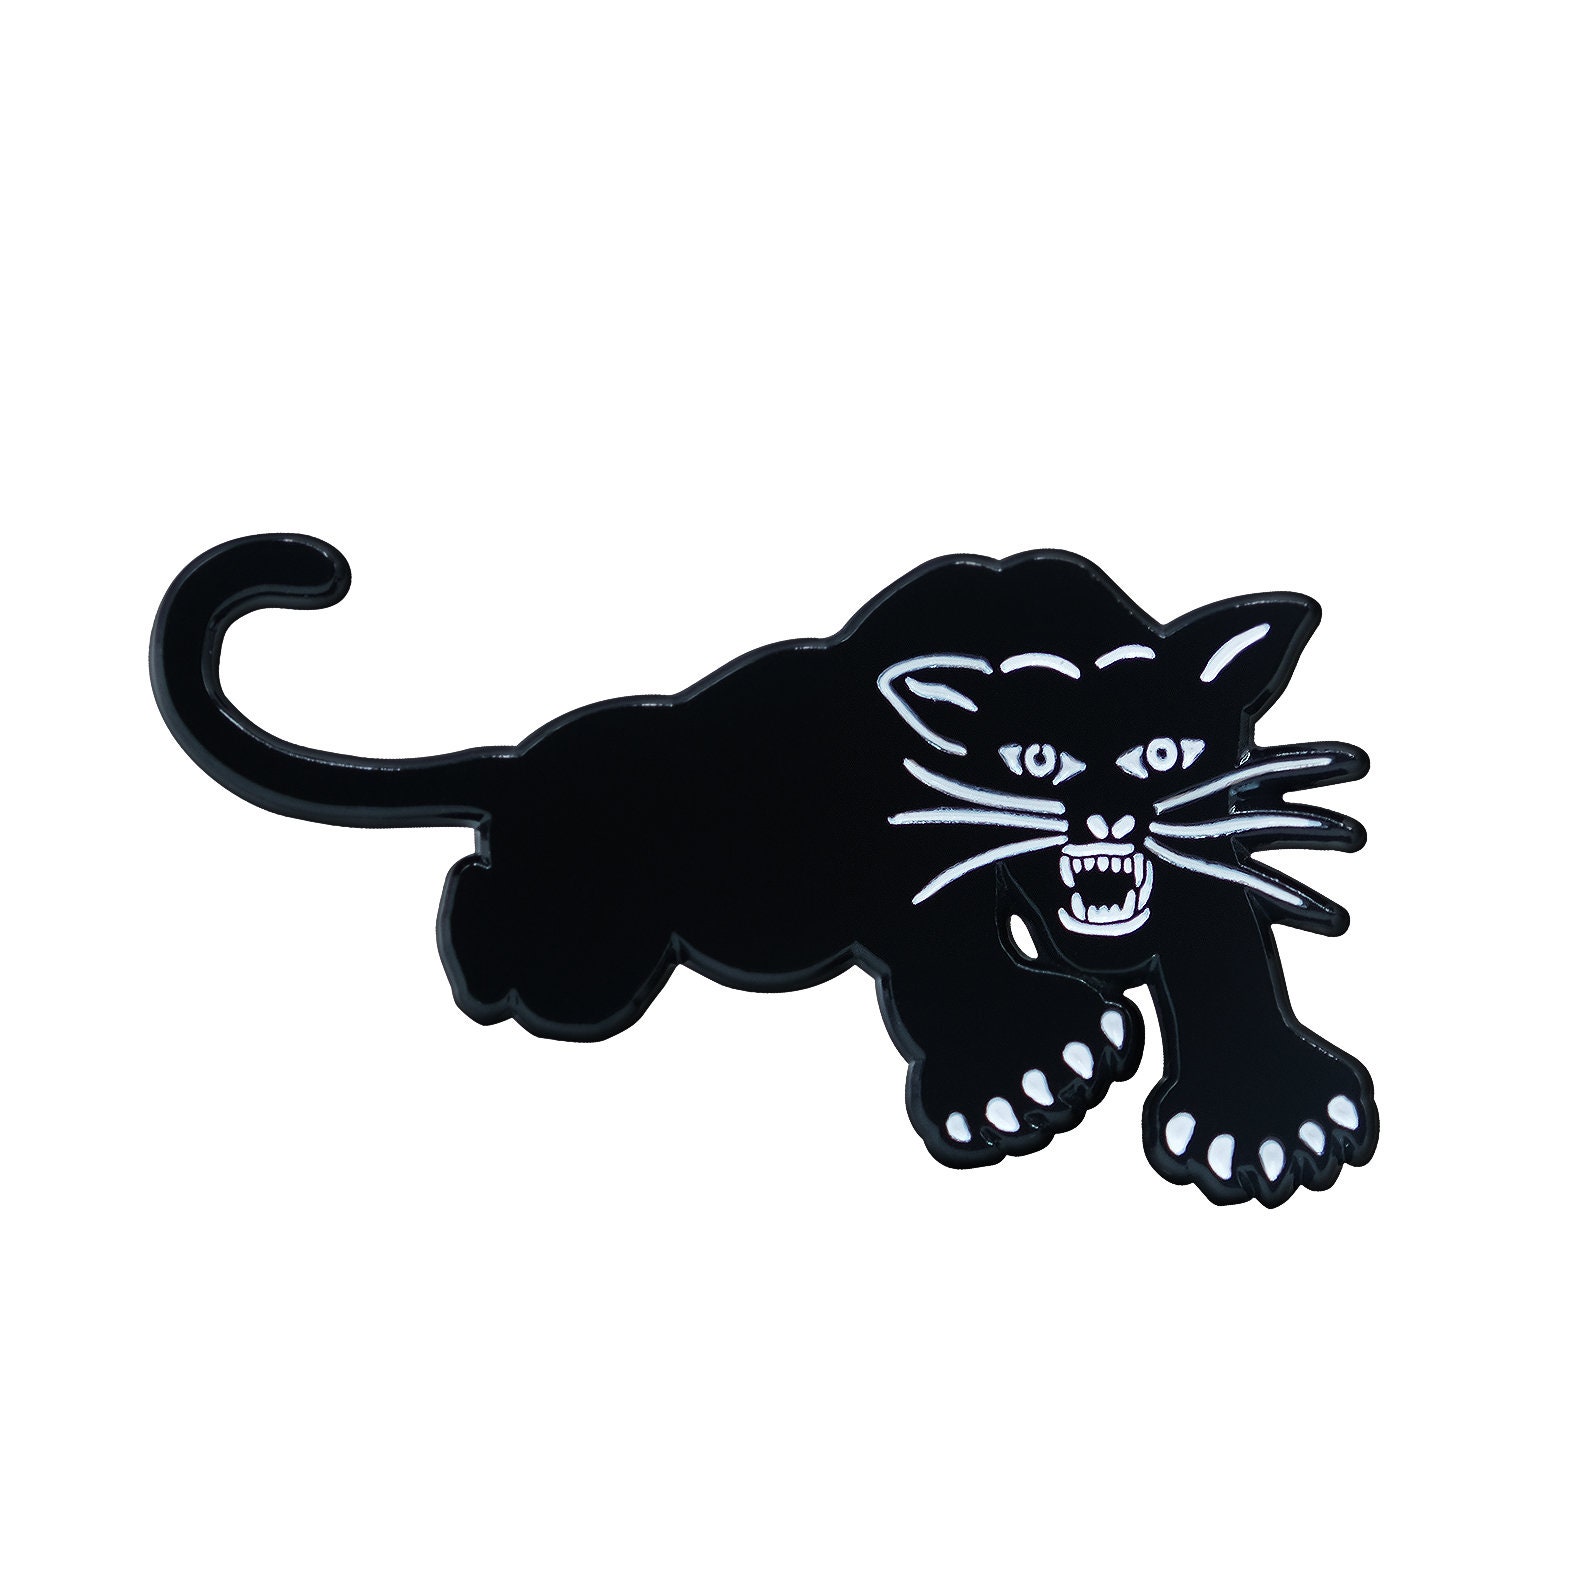 Black Power - Black Panthers Embroidered Iron-on Patch – jidesignsart